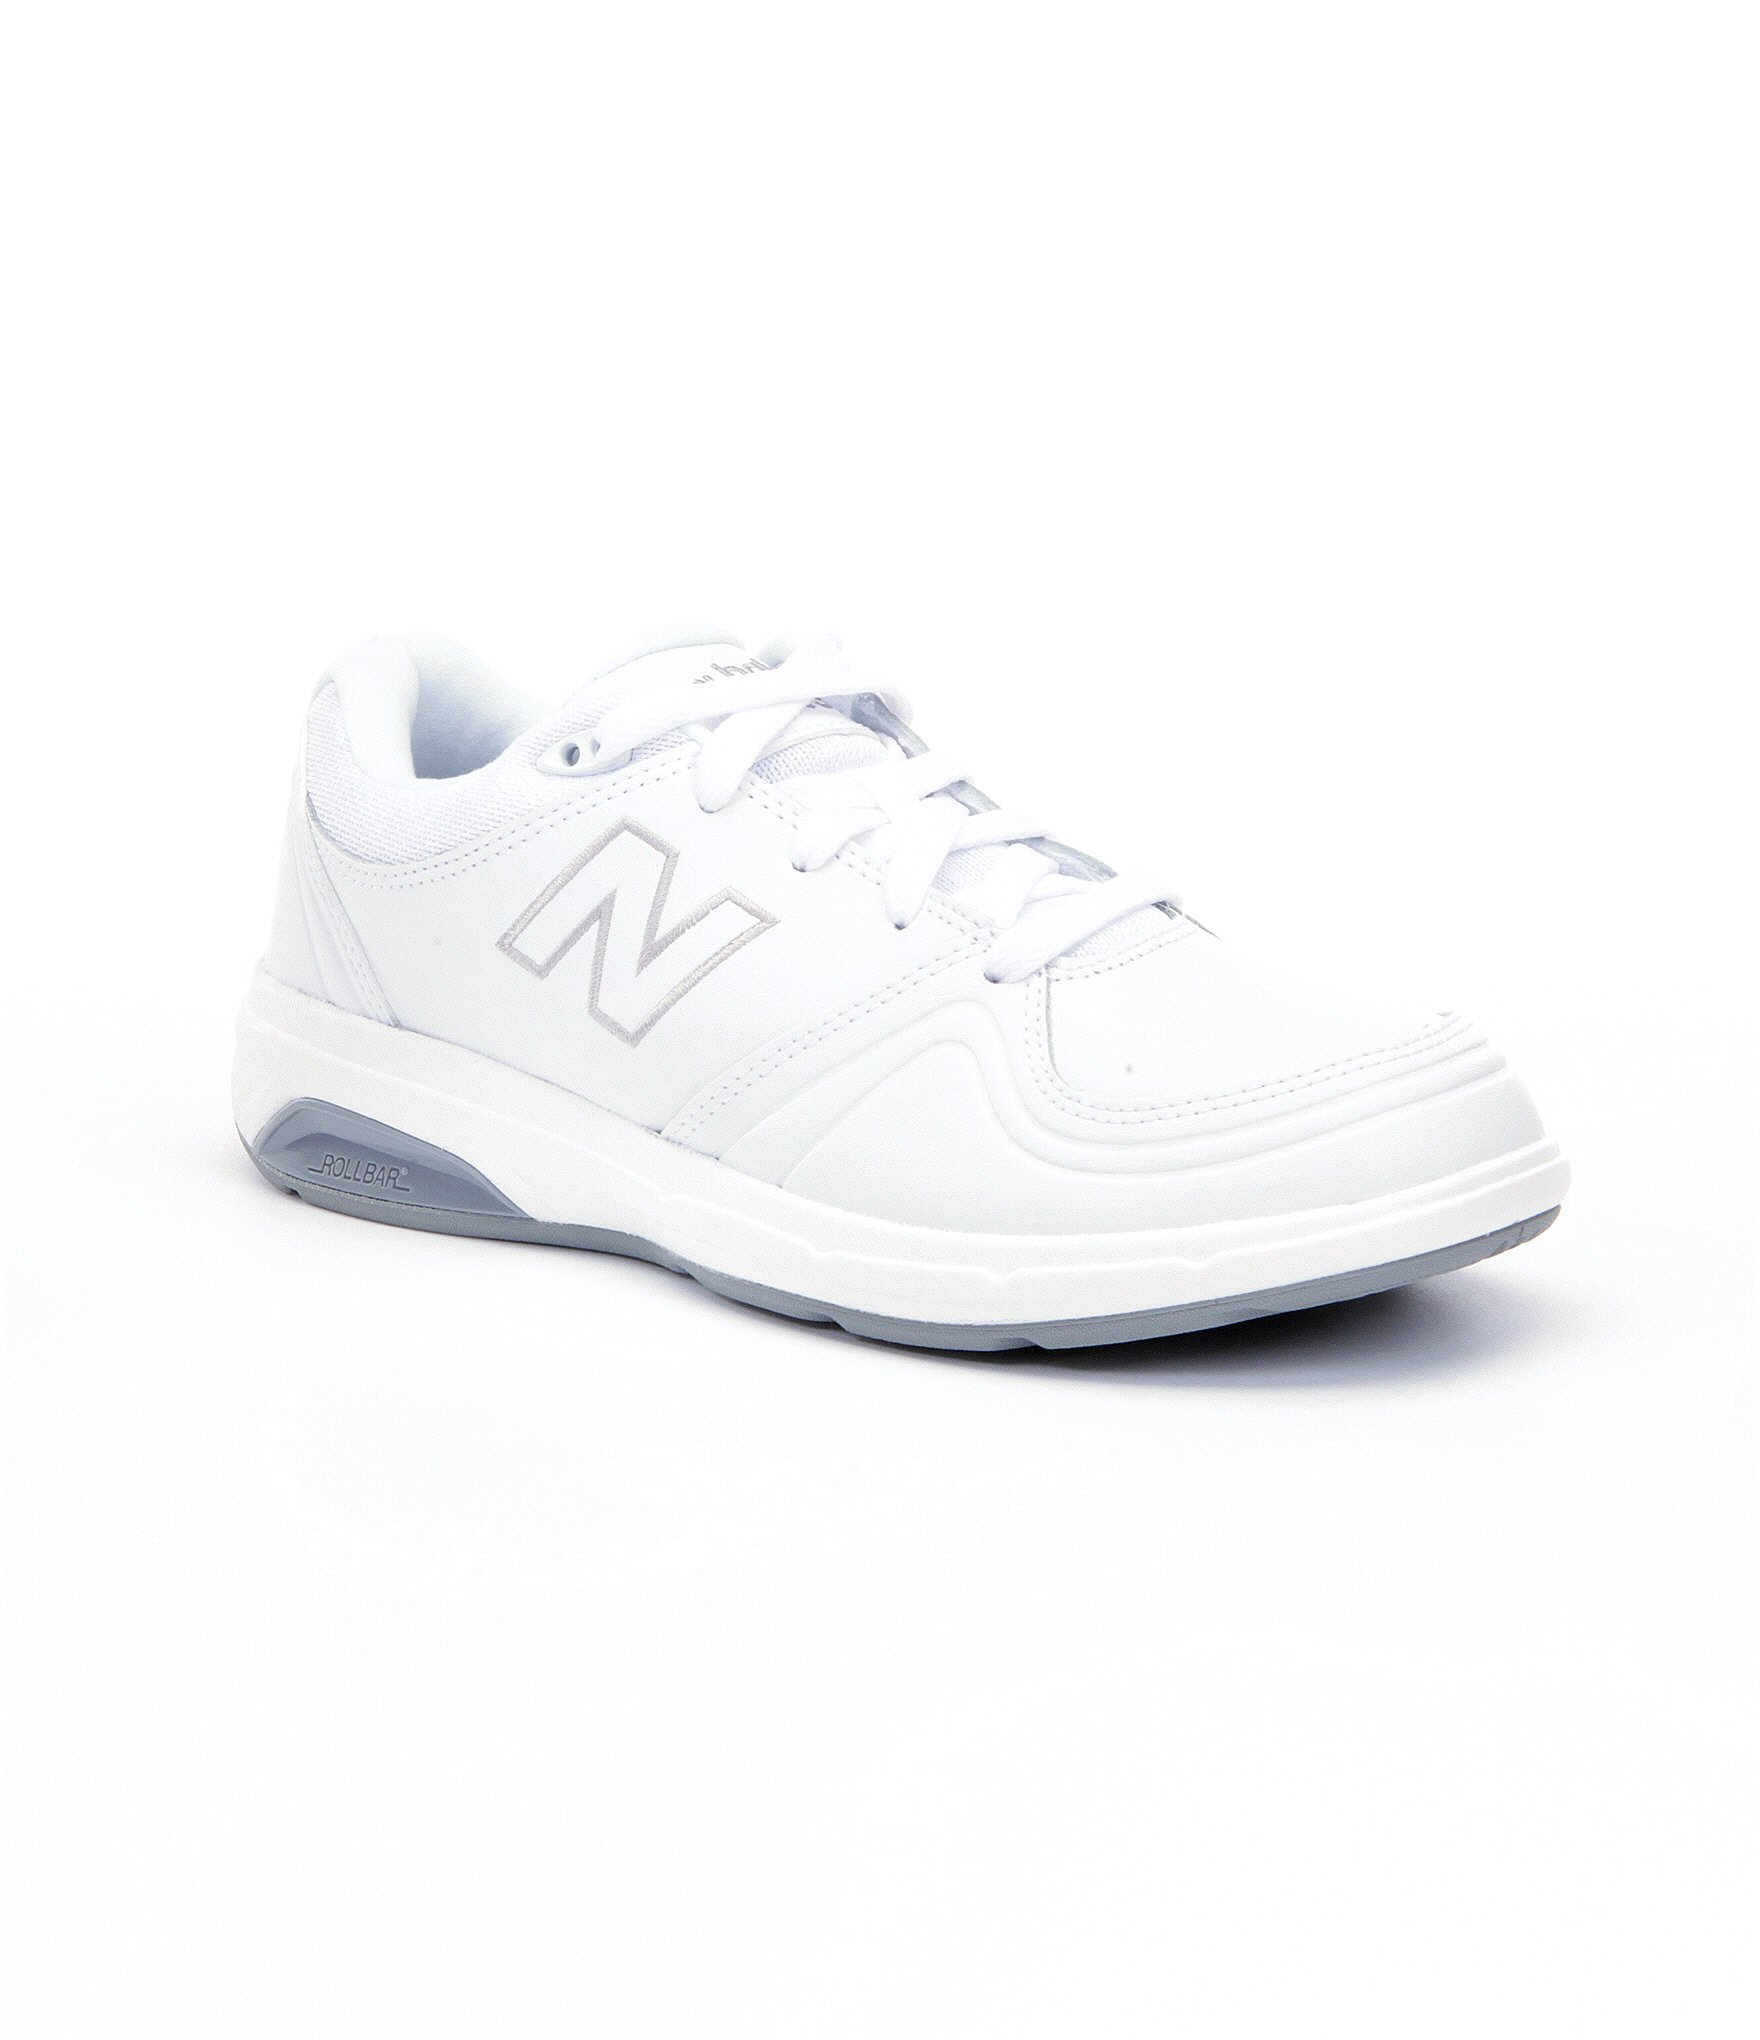 New balance 813 Walking Shoes in White | Lyst